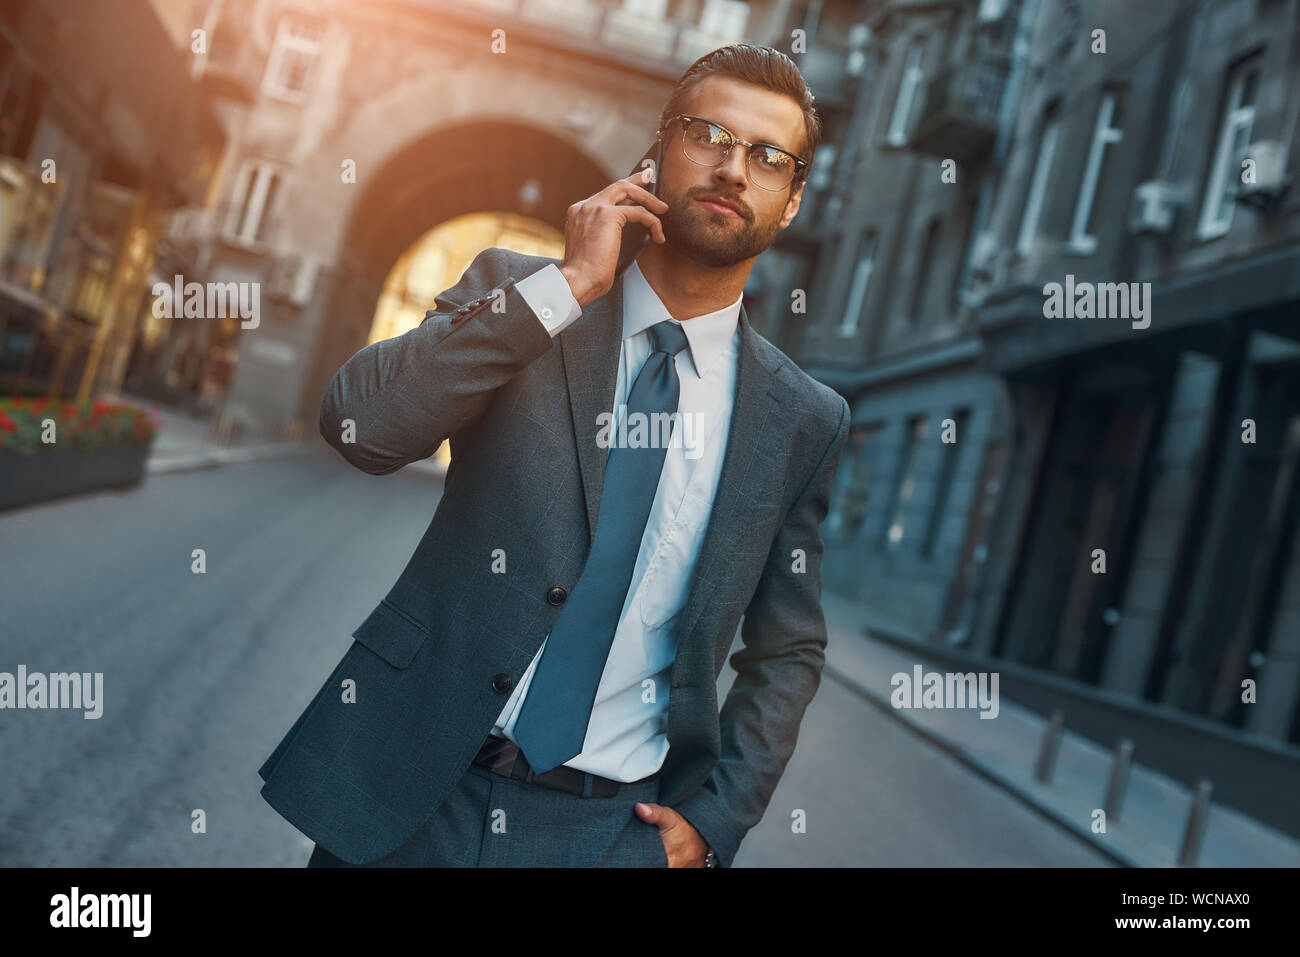 Busy man. Portrait of bearded businessman in full suit talking by phone with client while walking outdoors. Business concept Stock Photo